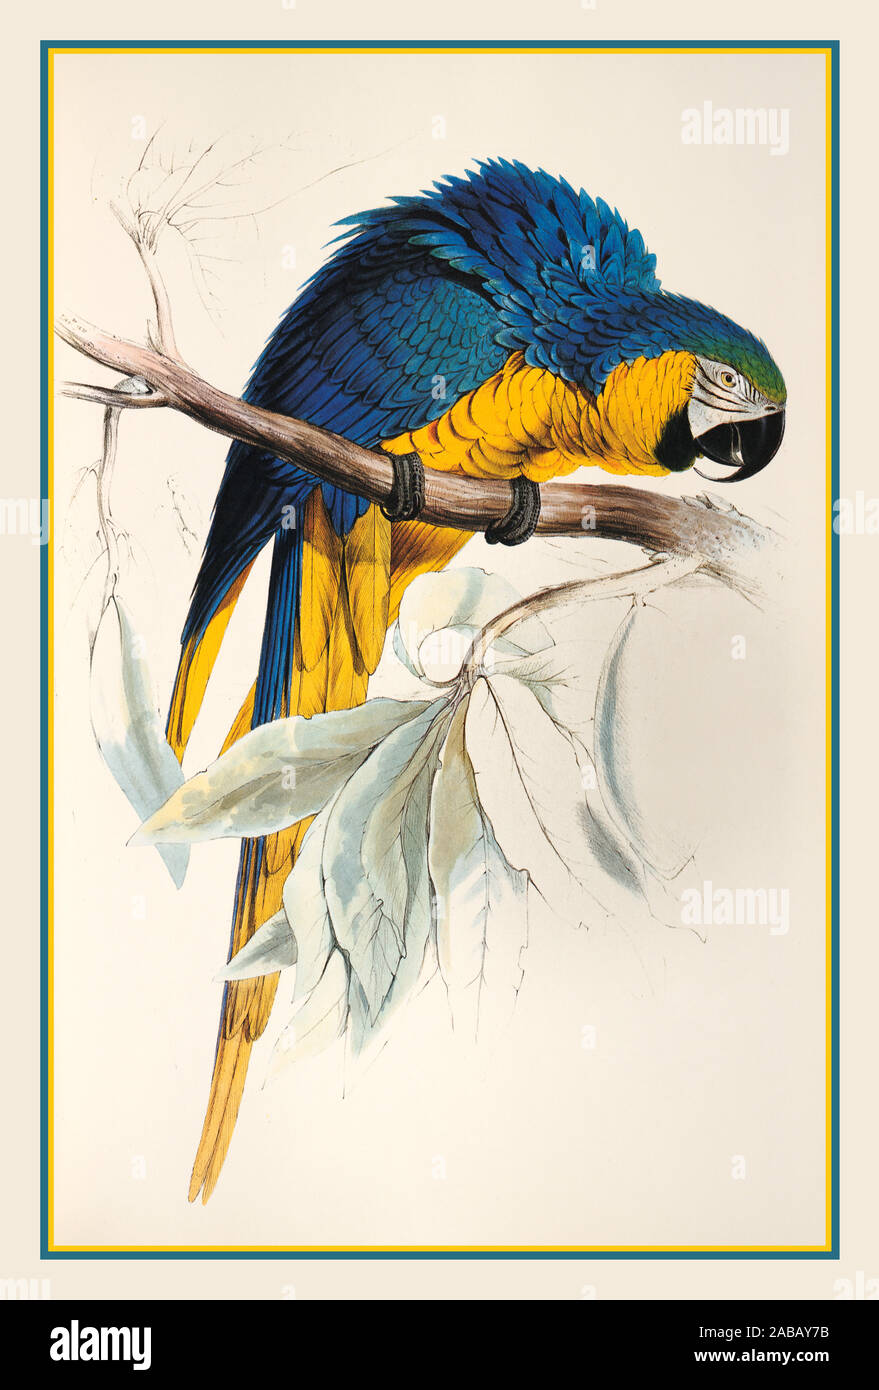 PARROT MACAW 1860’s.  Macrocercus Ararauna - Blue and Yellow Macaw Bird Lithograph Vintage Page Illustration Stock Photo